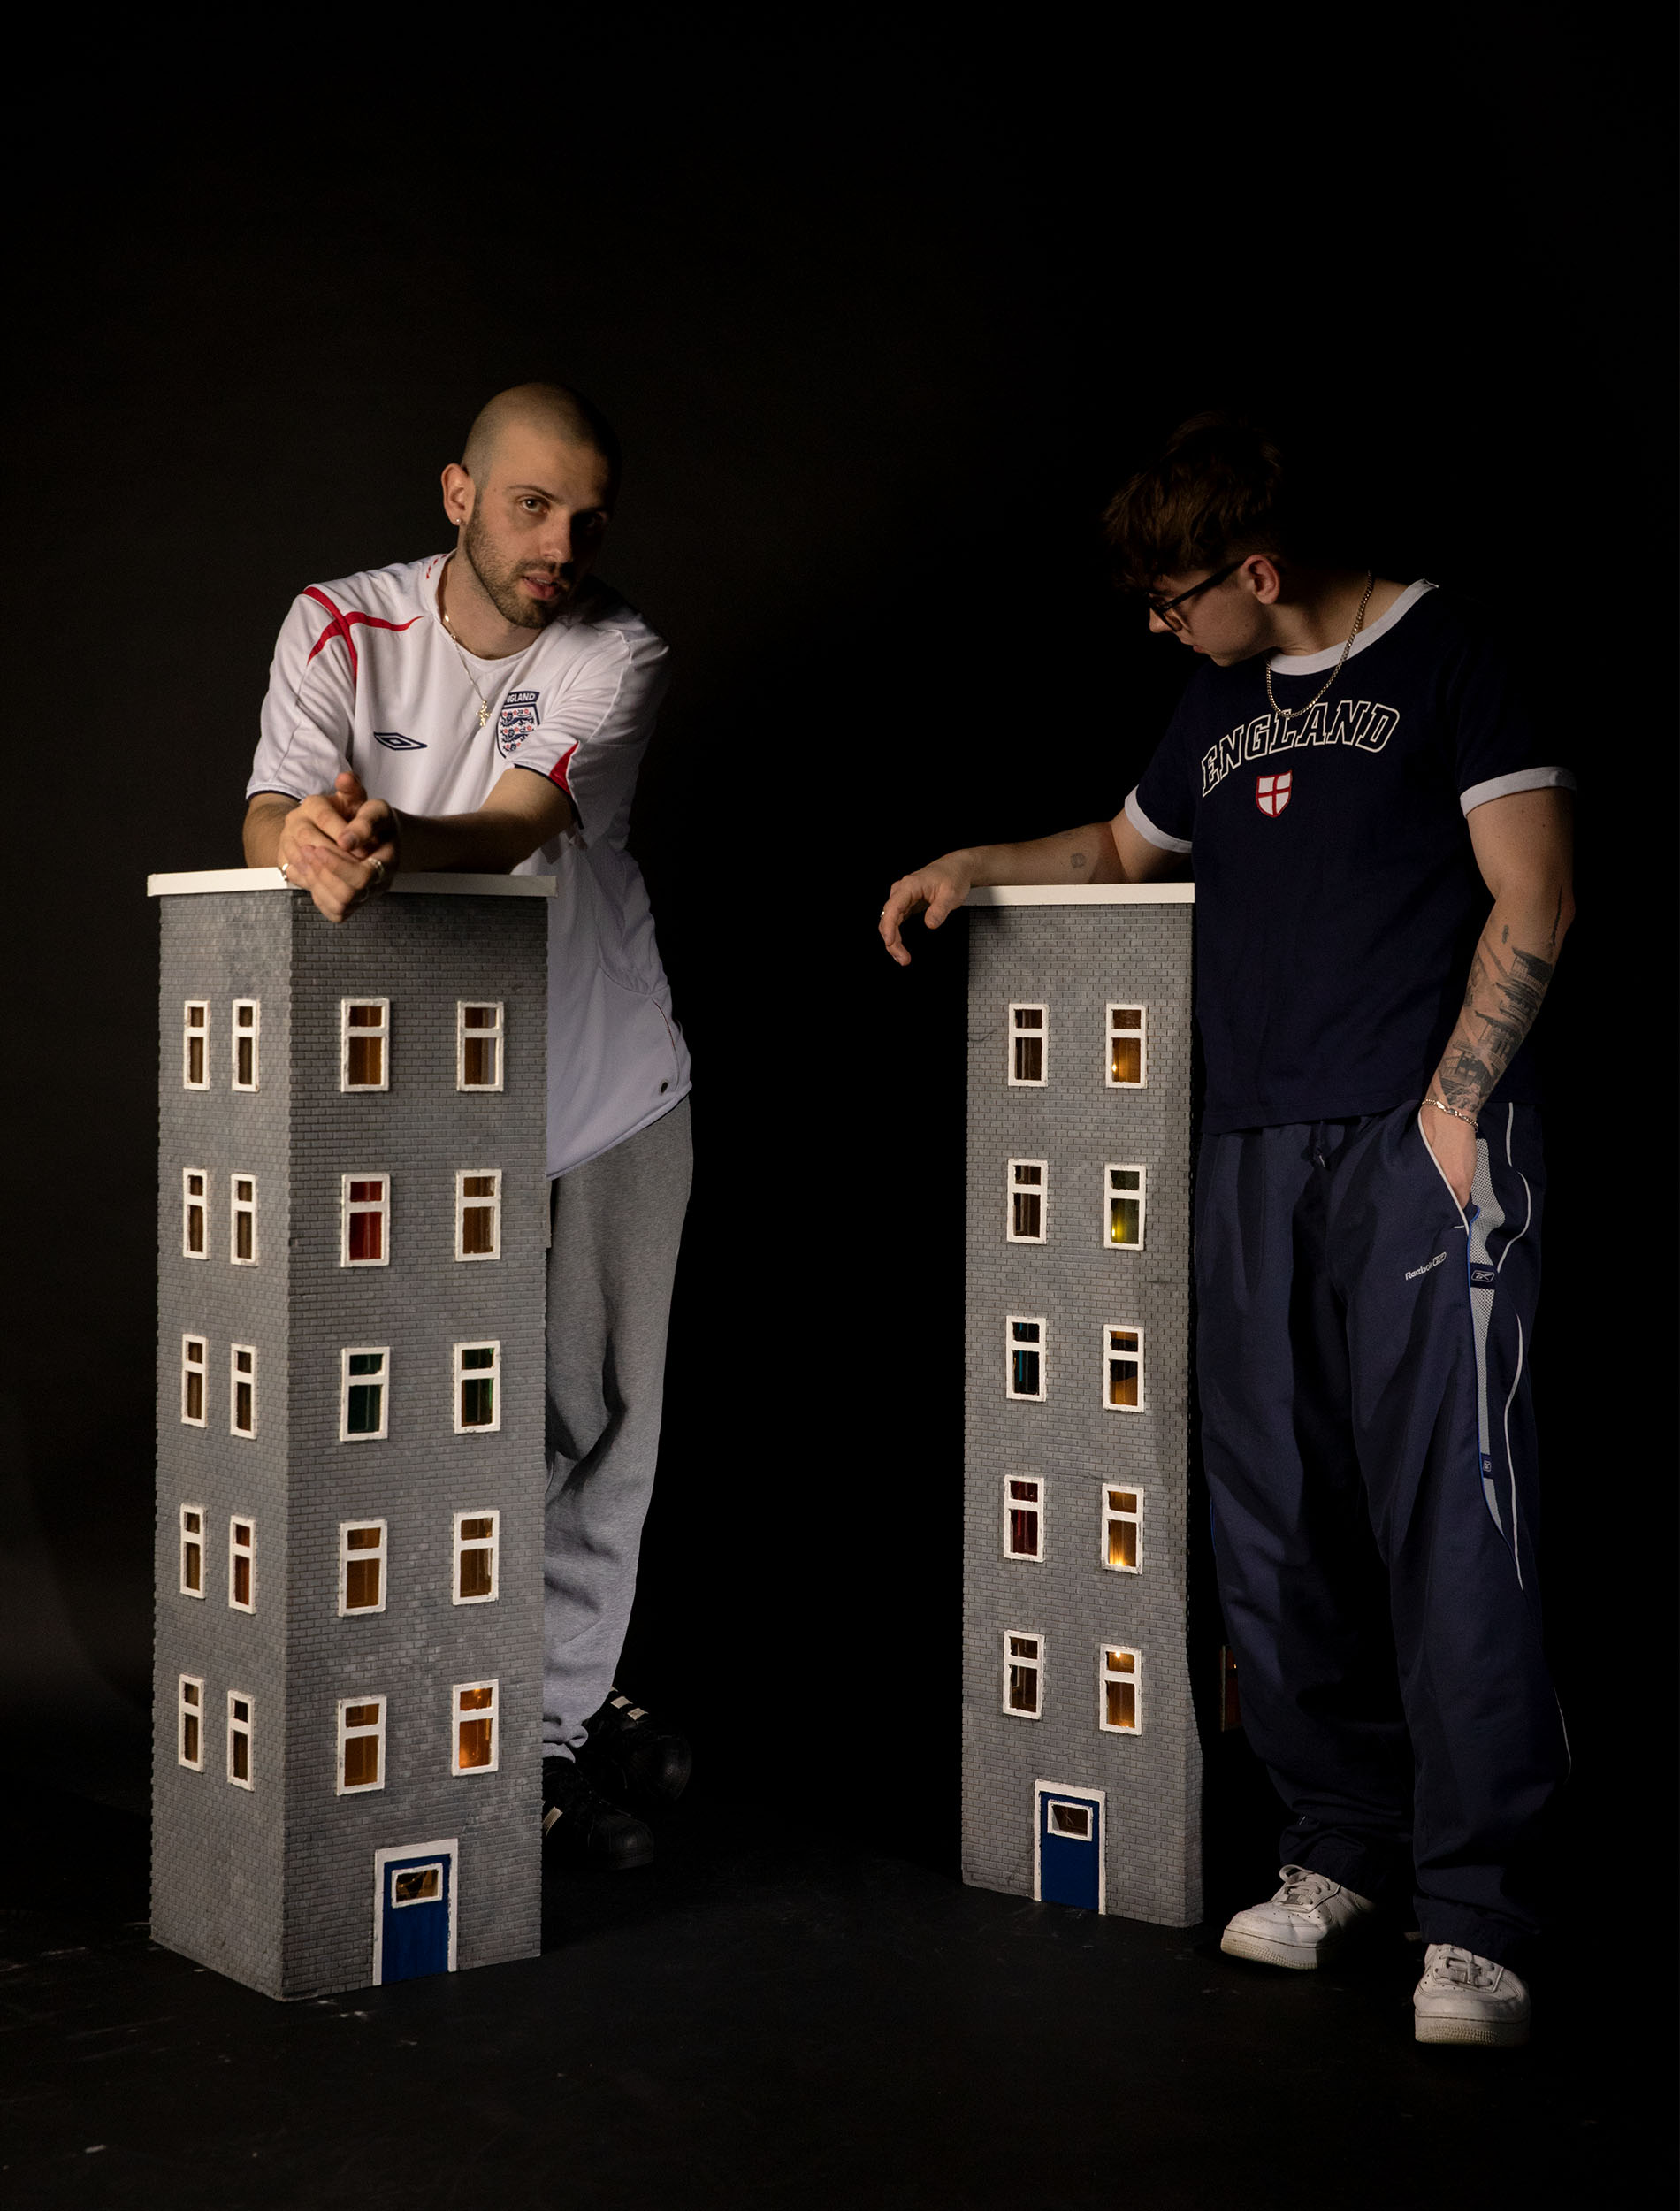 This project was made to represent the working class in a way that avoids mockery and shame. The flat blocks, a setting which is stigmatised and neglected turned into an art piece which hopefully will make people proud of their roots.